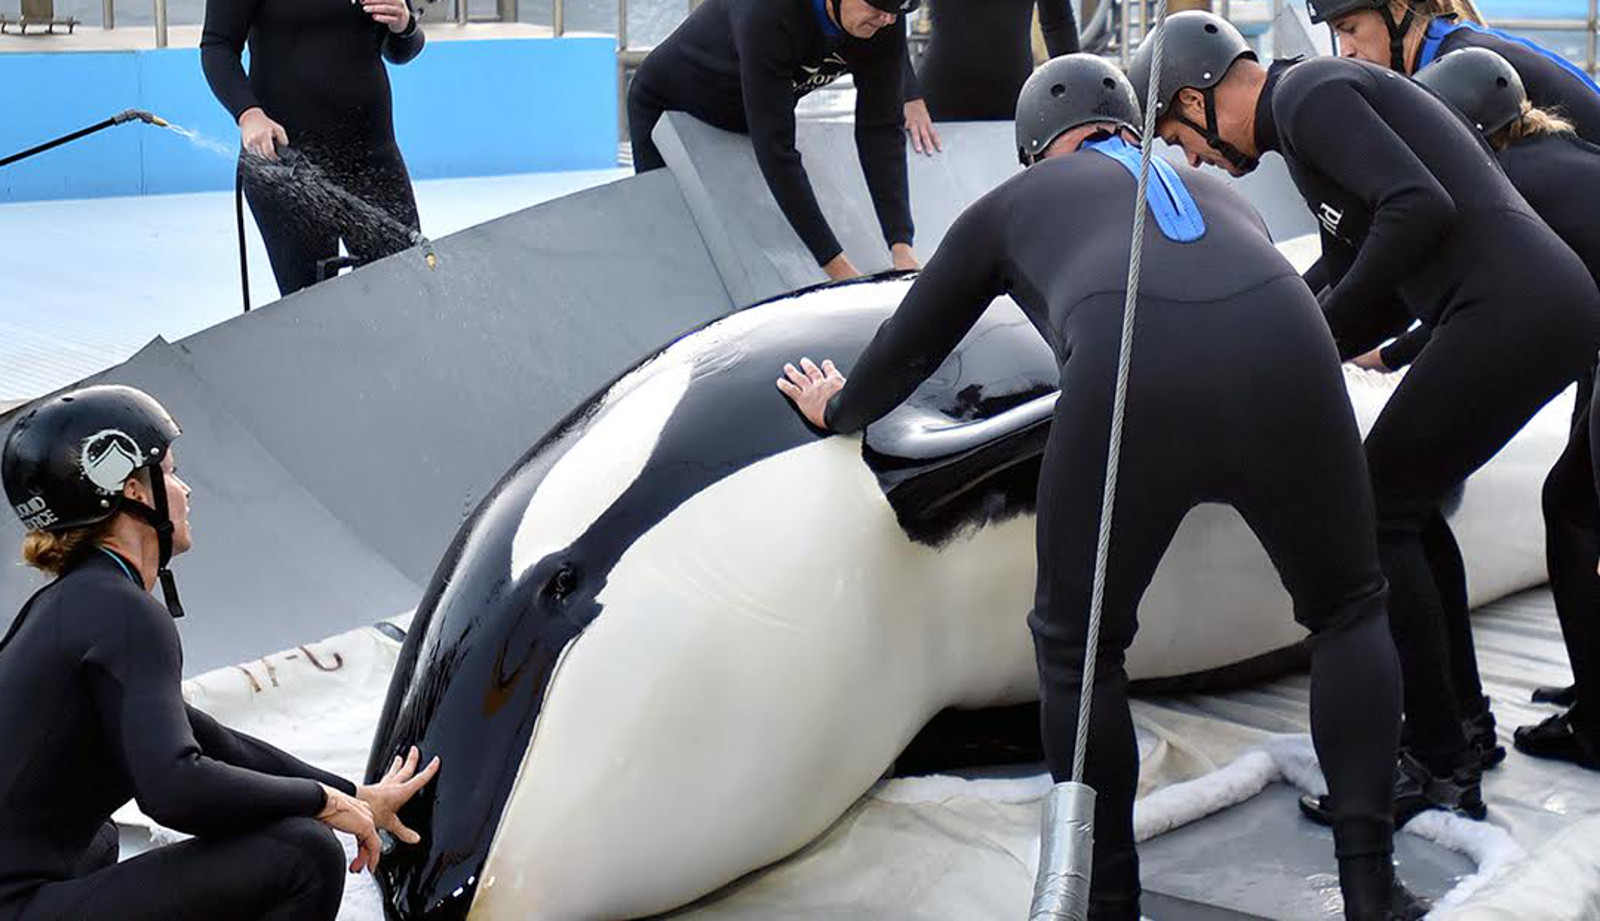 Captive Whales Are Dying From Illnesses Mostly Only Seen in Captivity